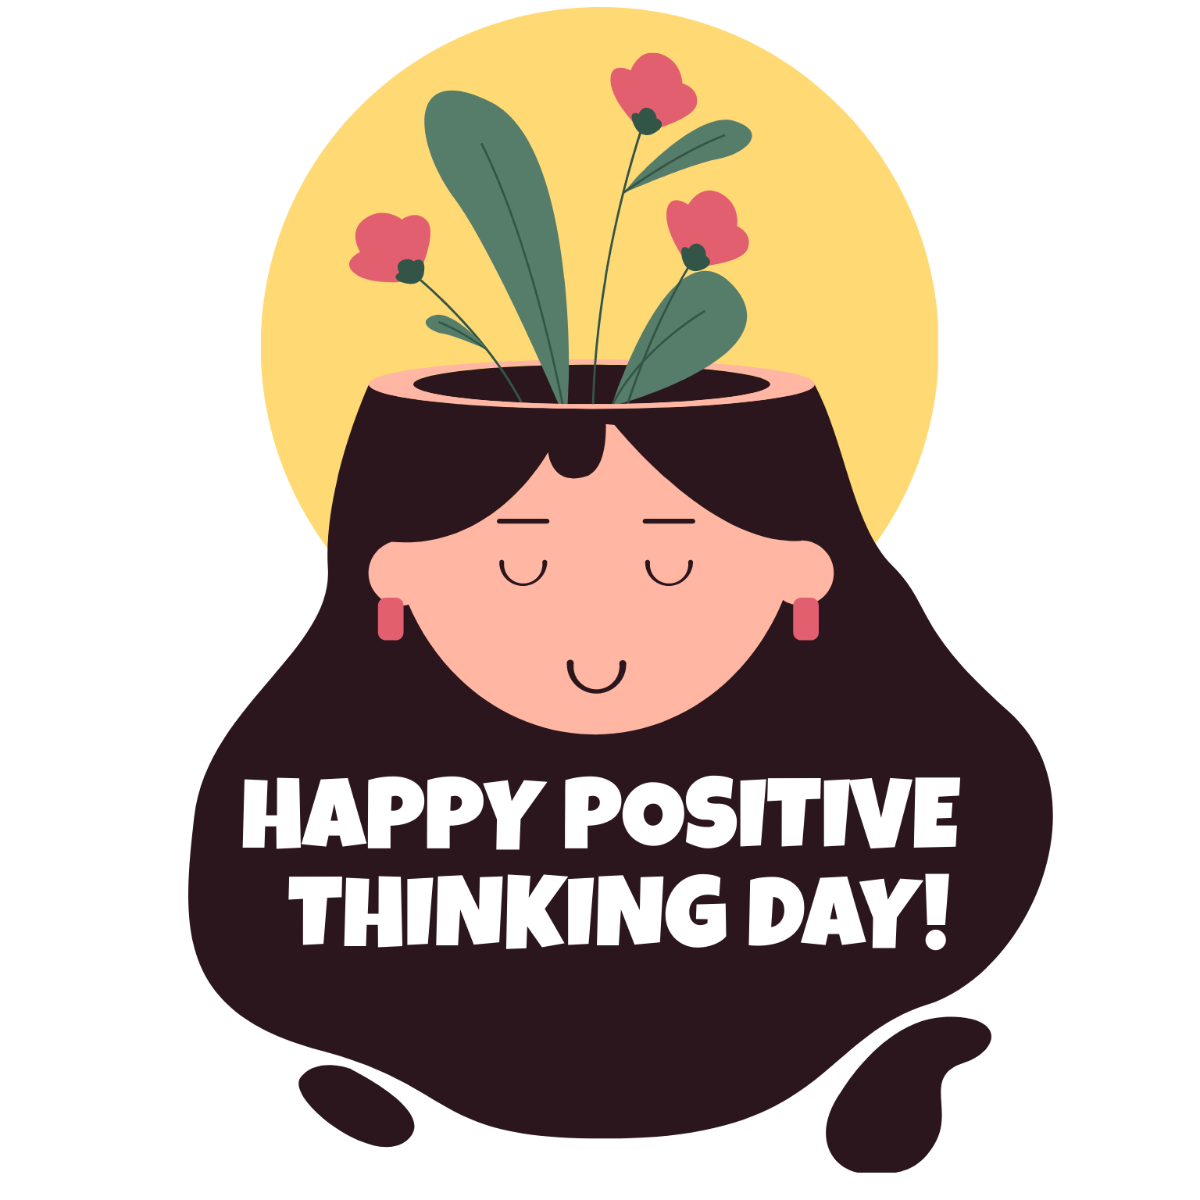 Happy Positive Thinking Day Illustration Template